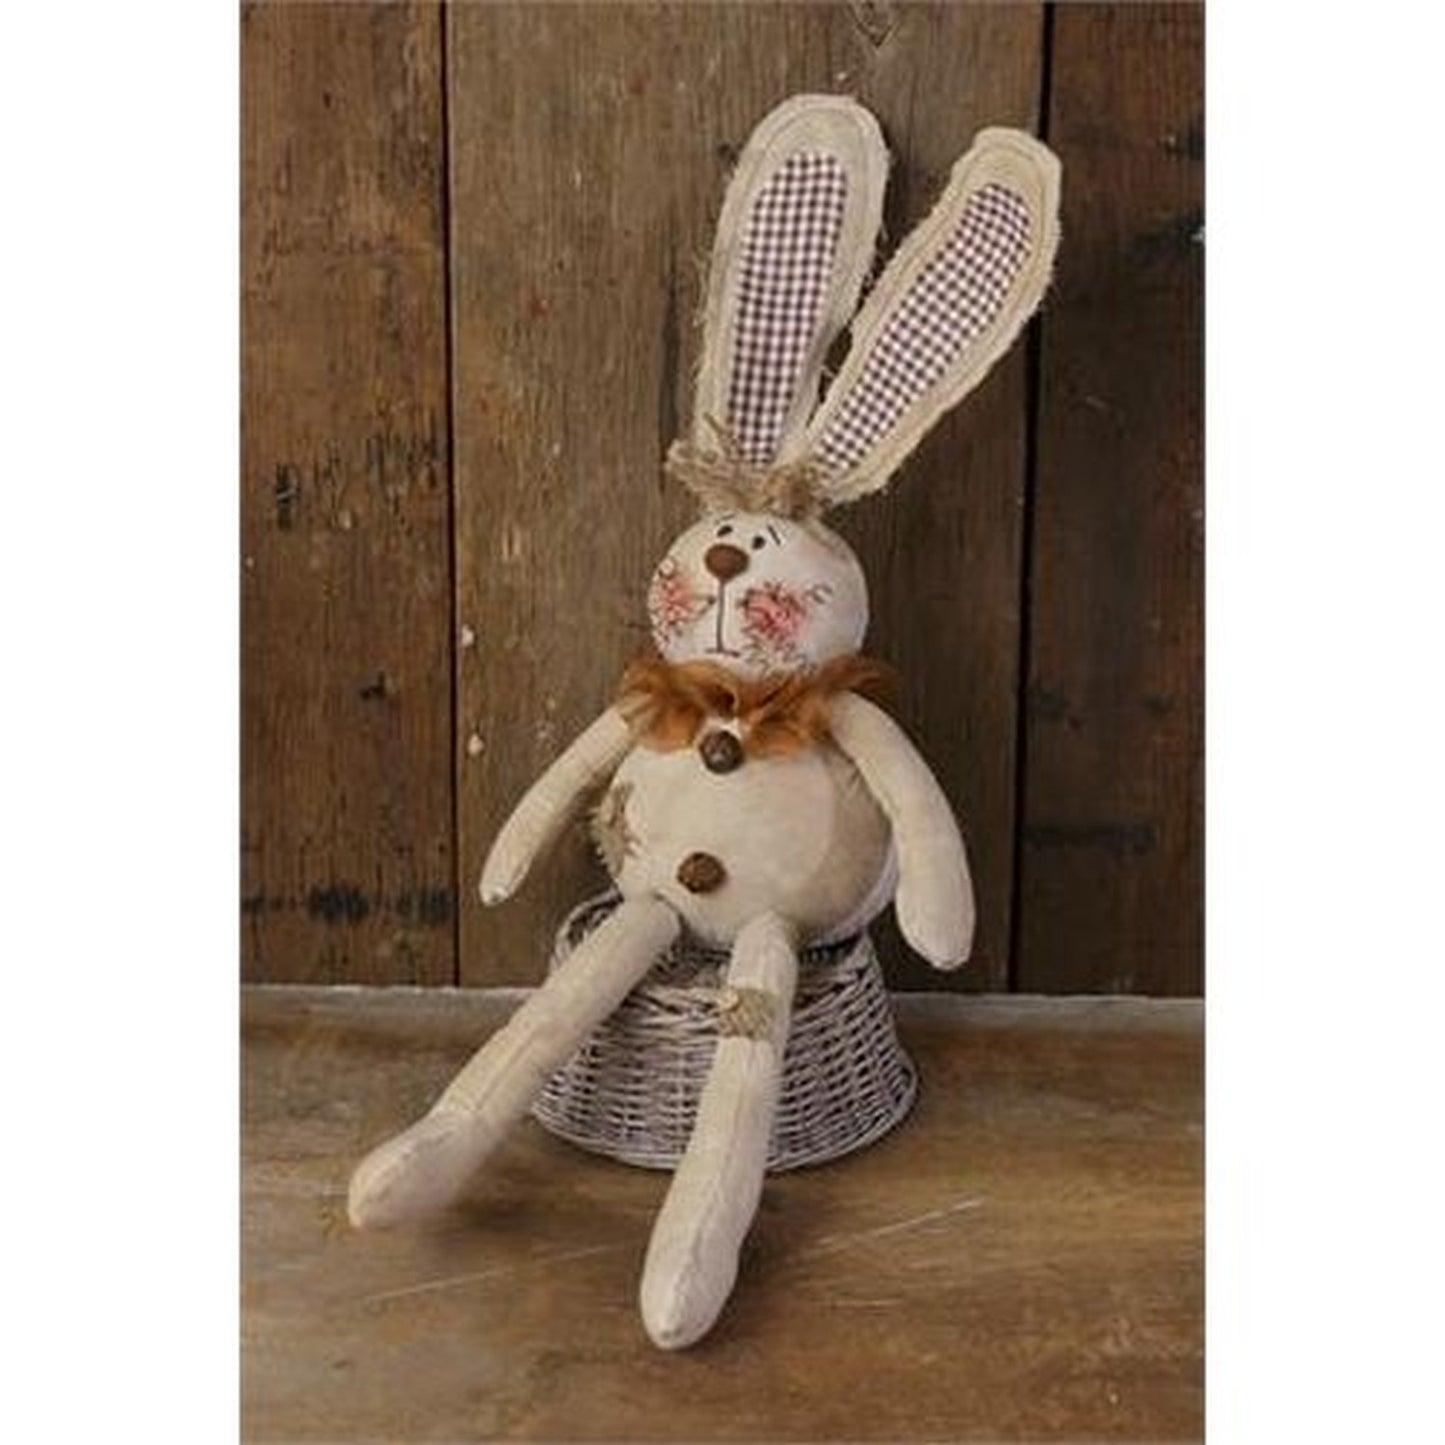 Your Heart's Delight Buttons Burlap & Bows - Sitting Bunny, Fabric